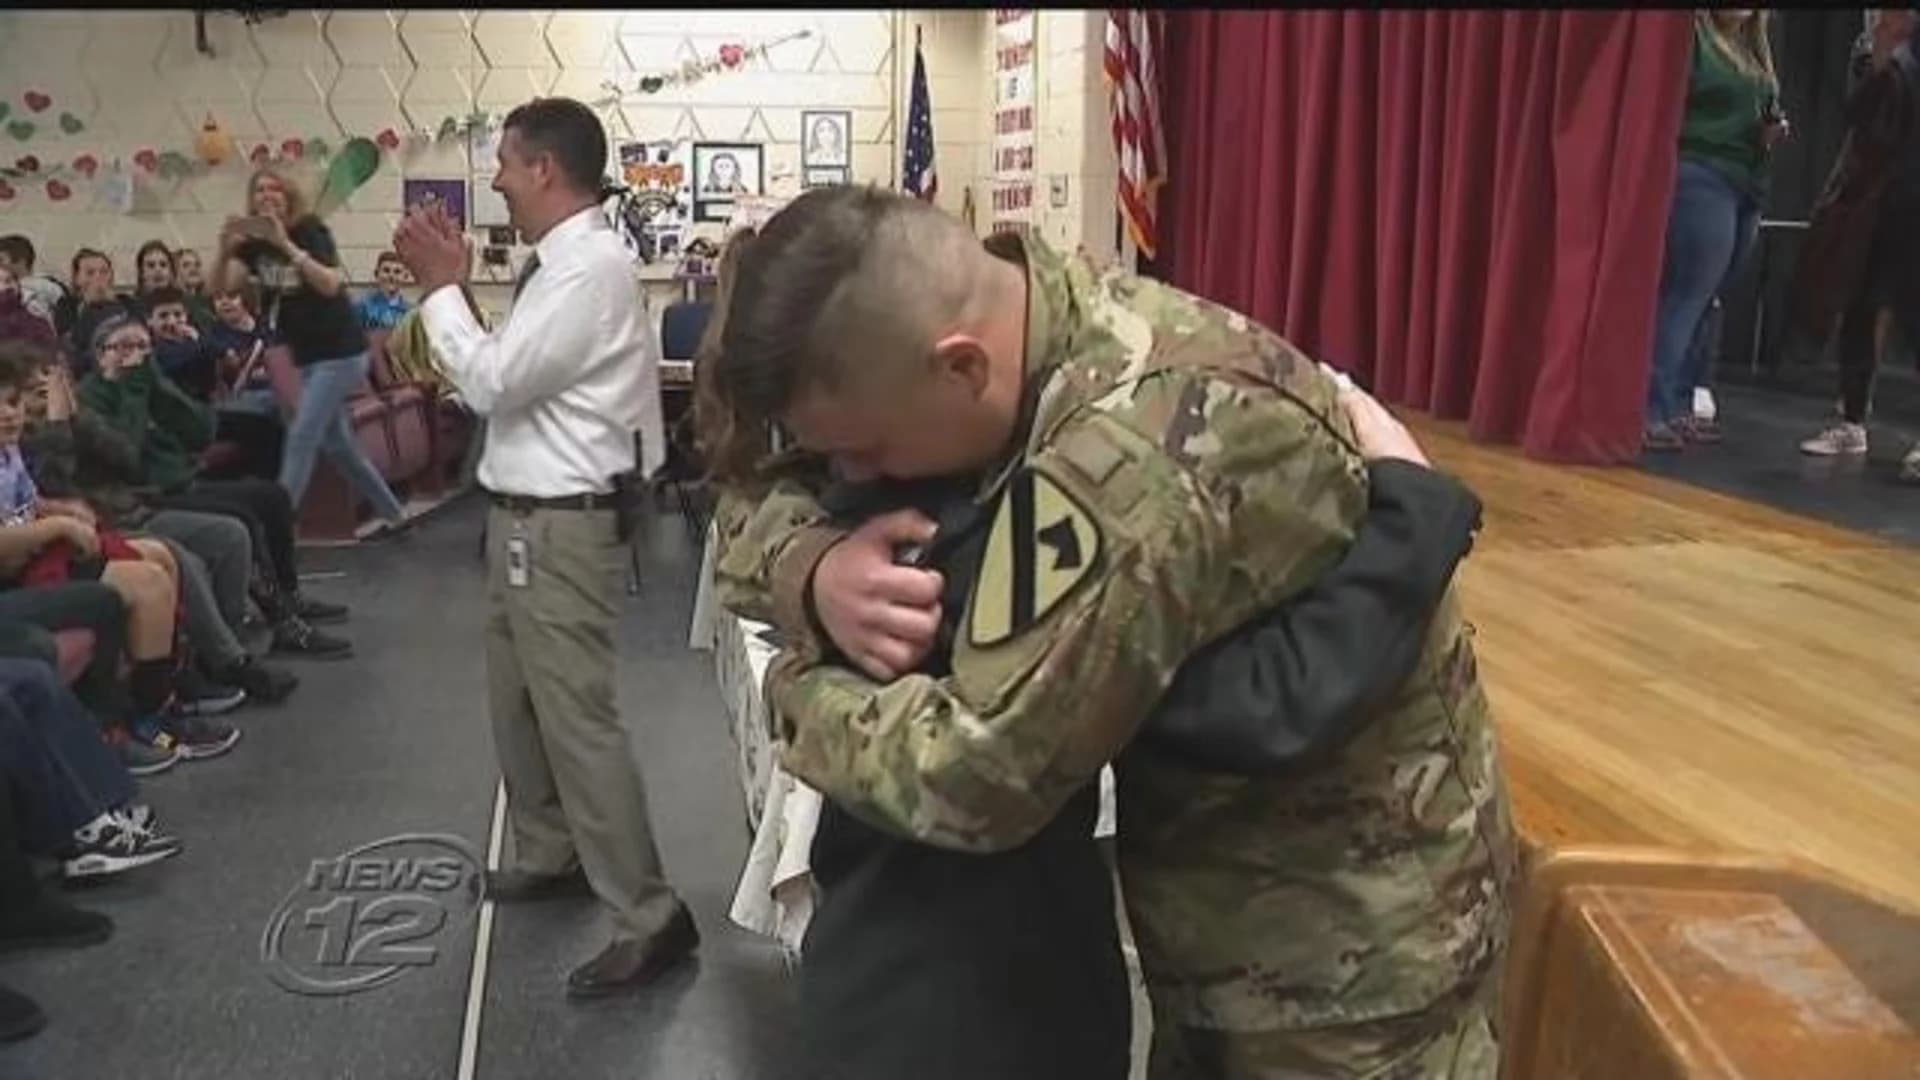 Military brother surprises younger sister at school assembly